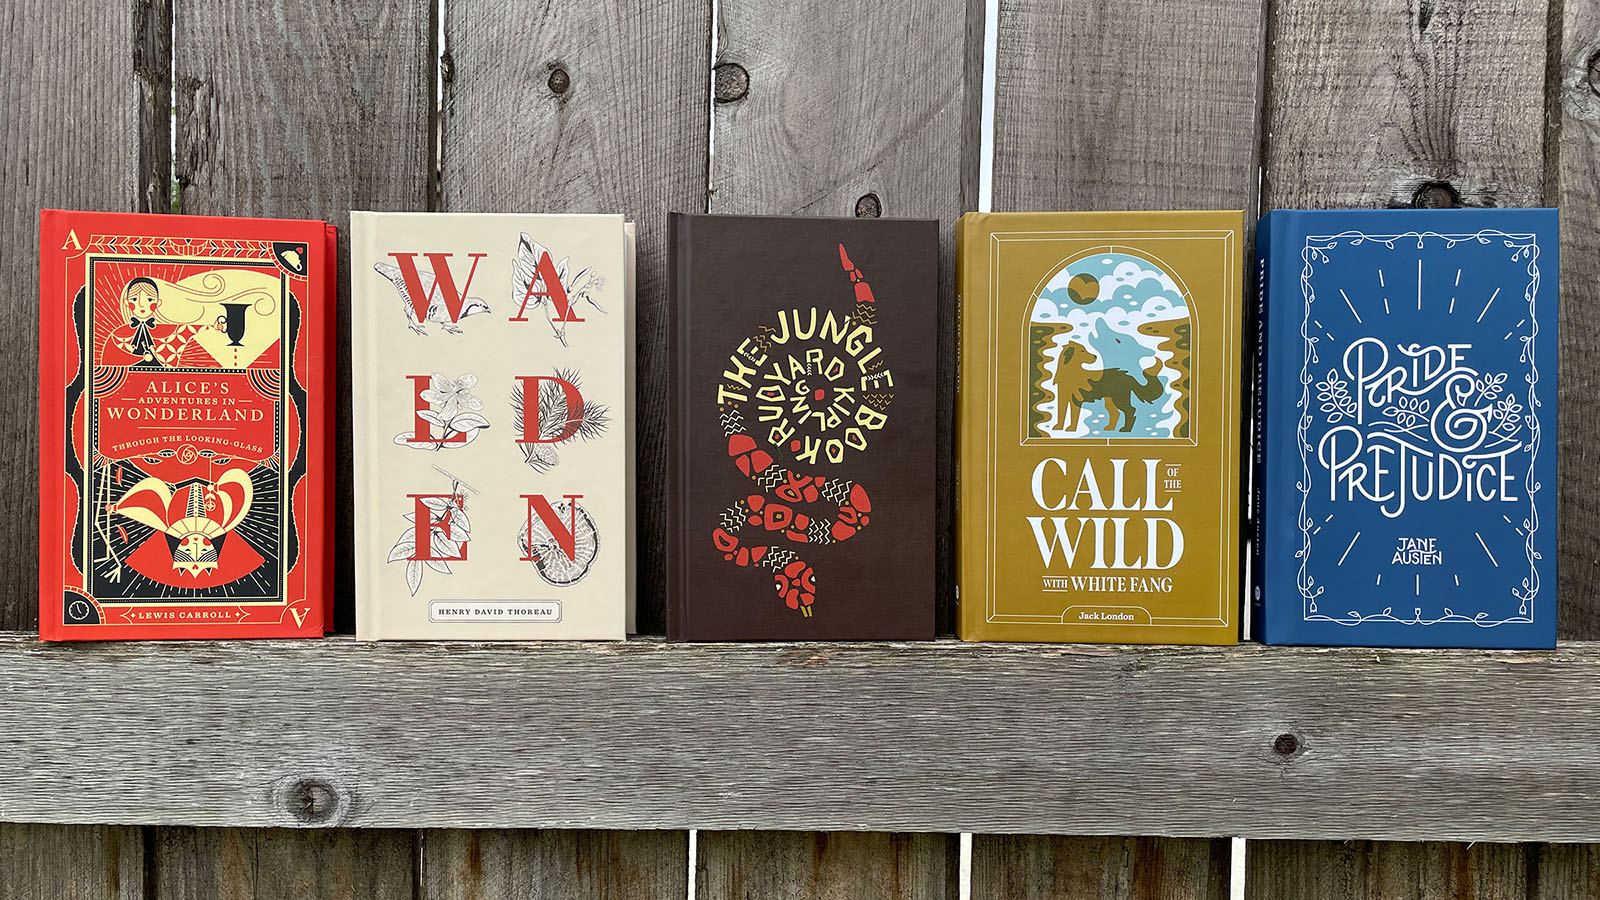 the crossvine classic book jackets reimagined